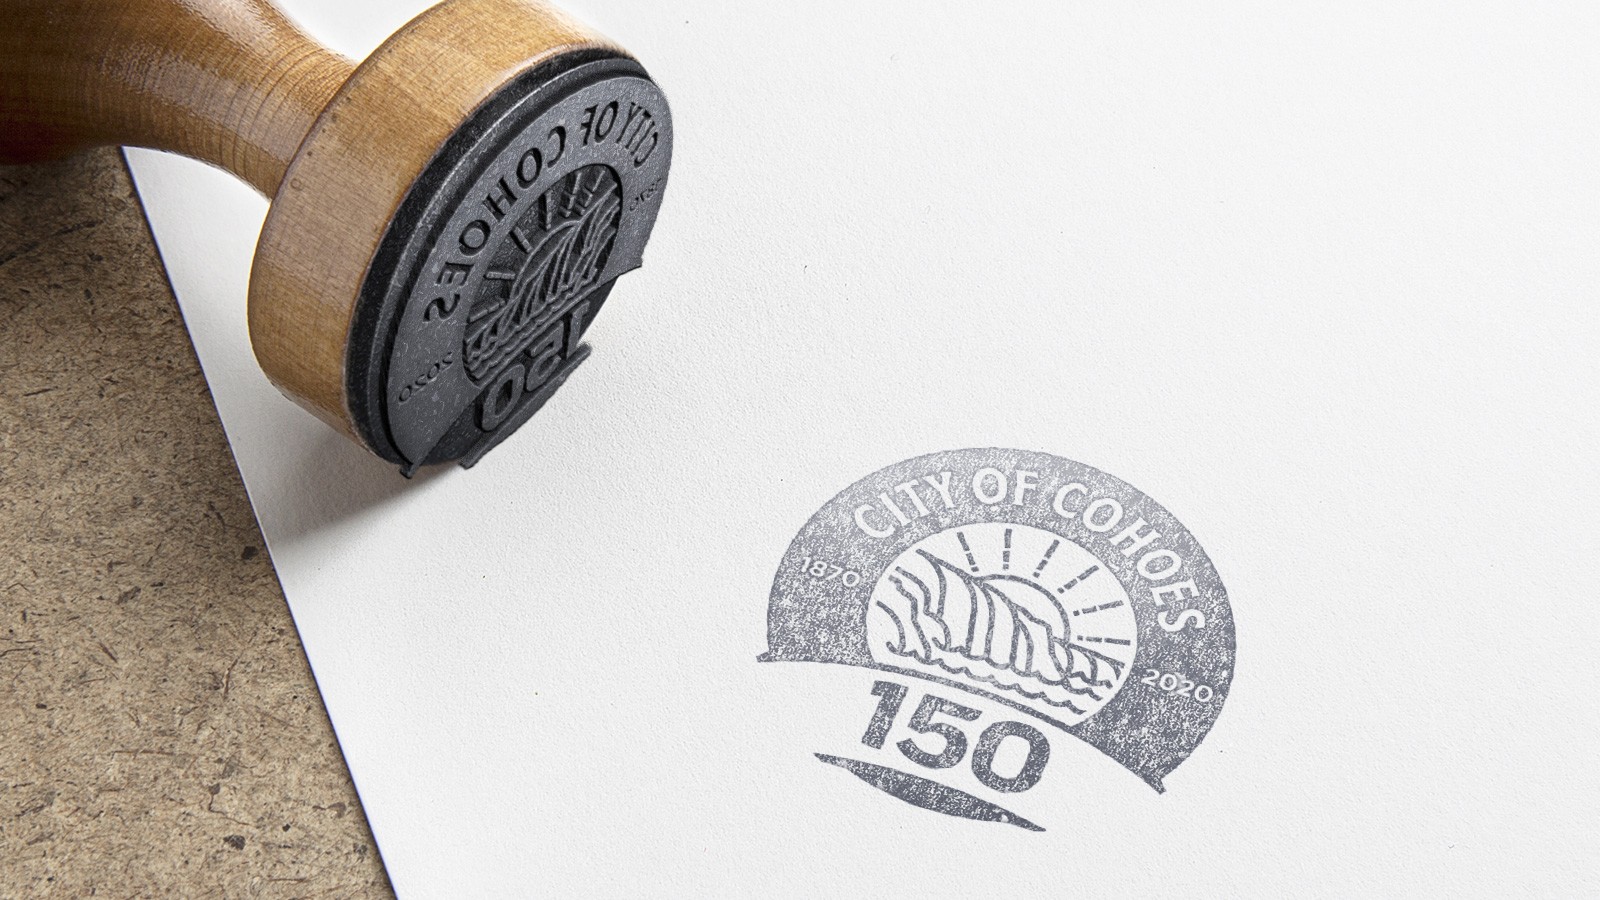 City of Cohoes | Logo Stamp